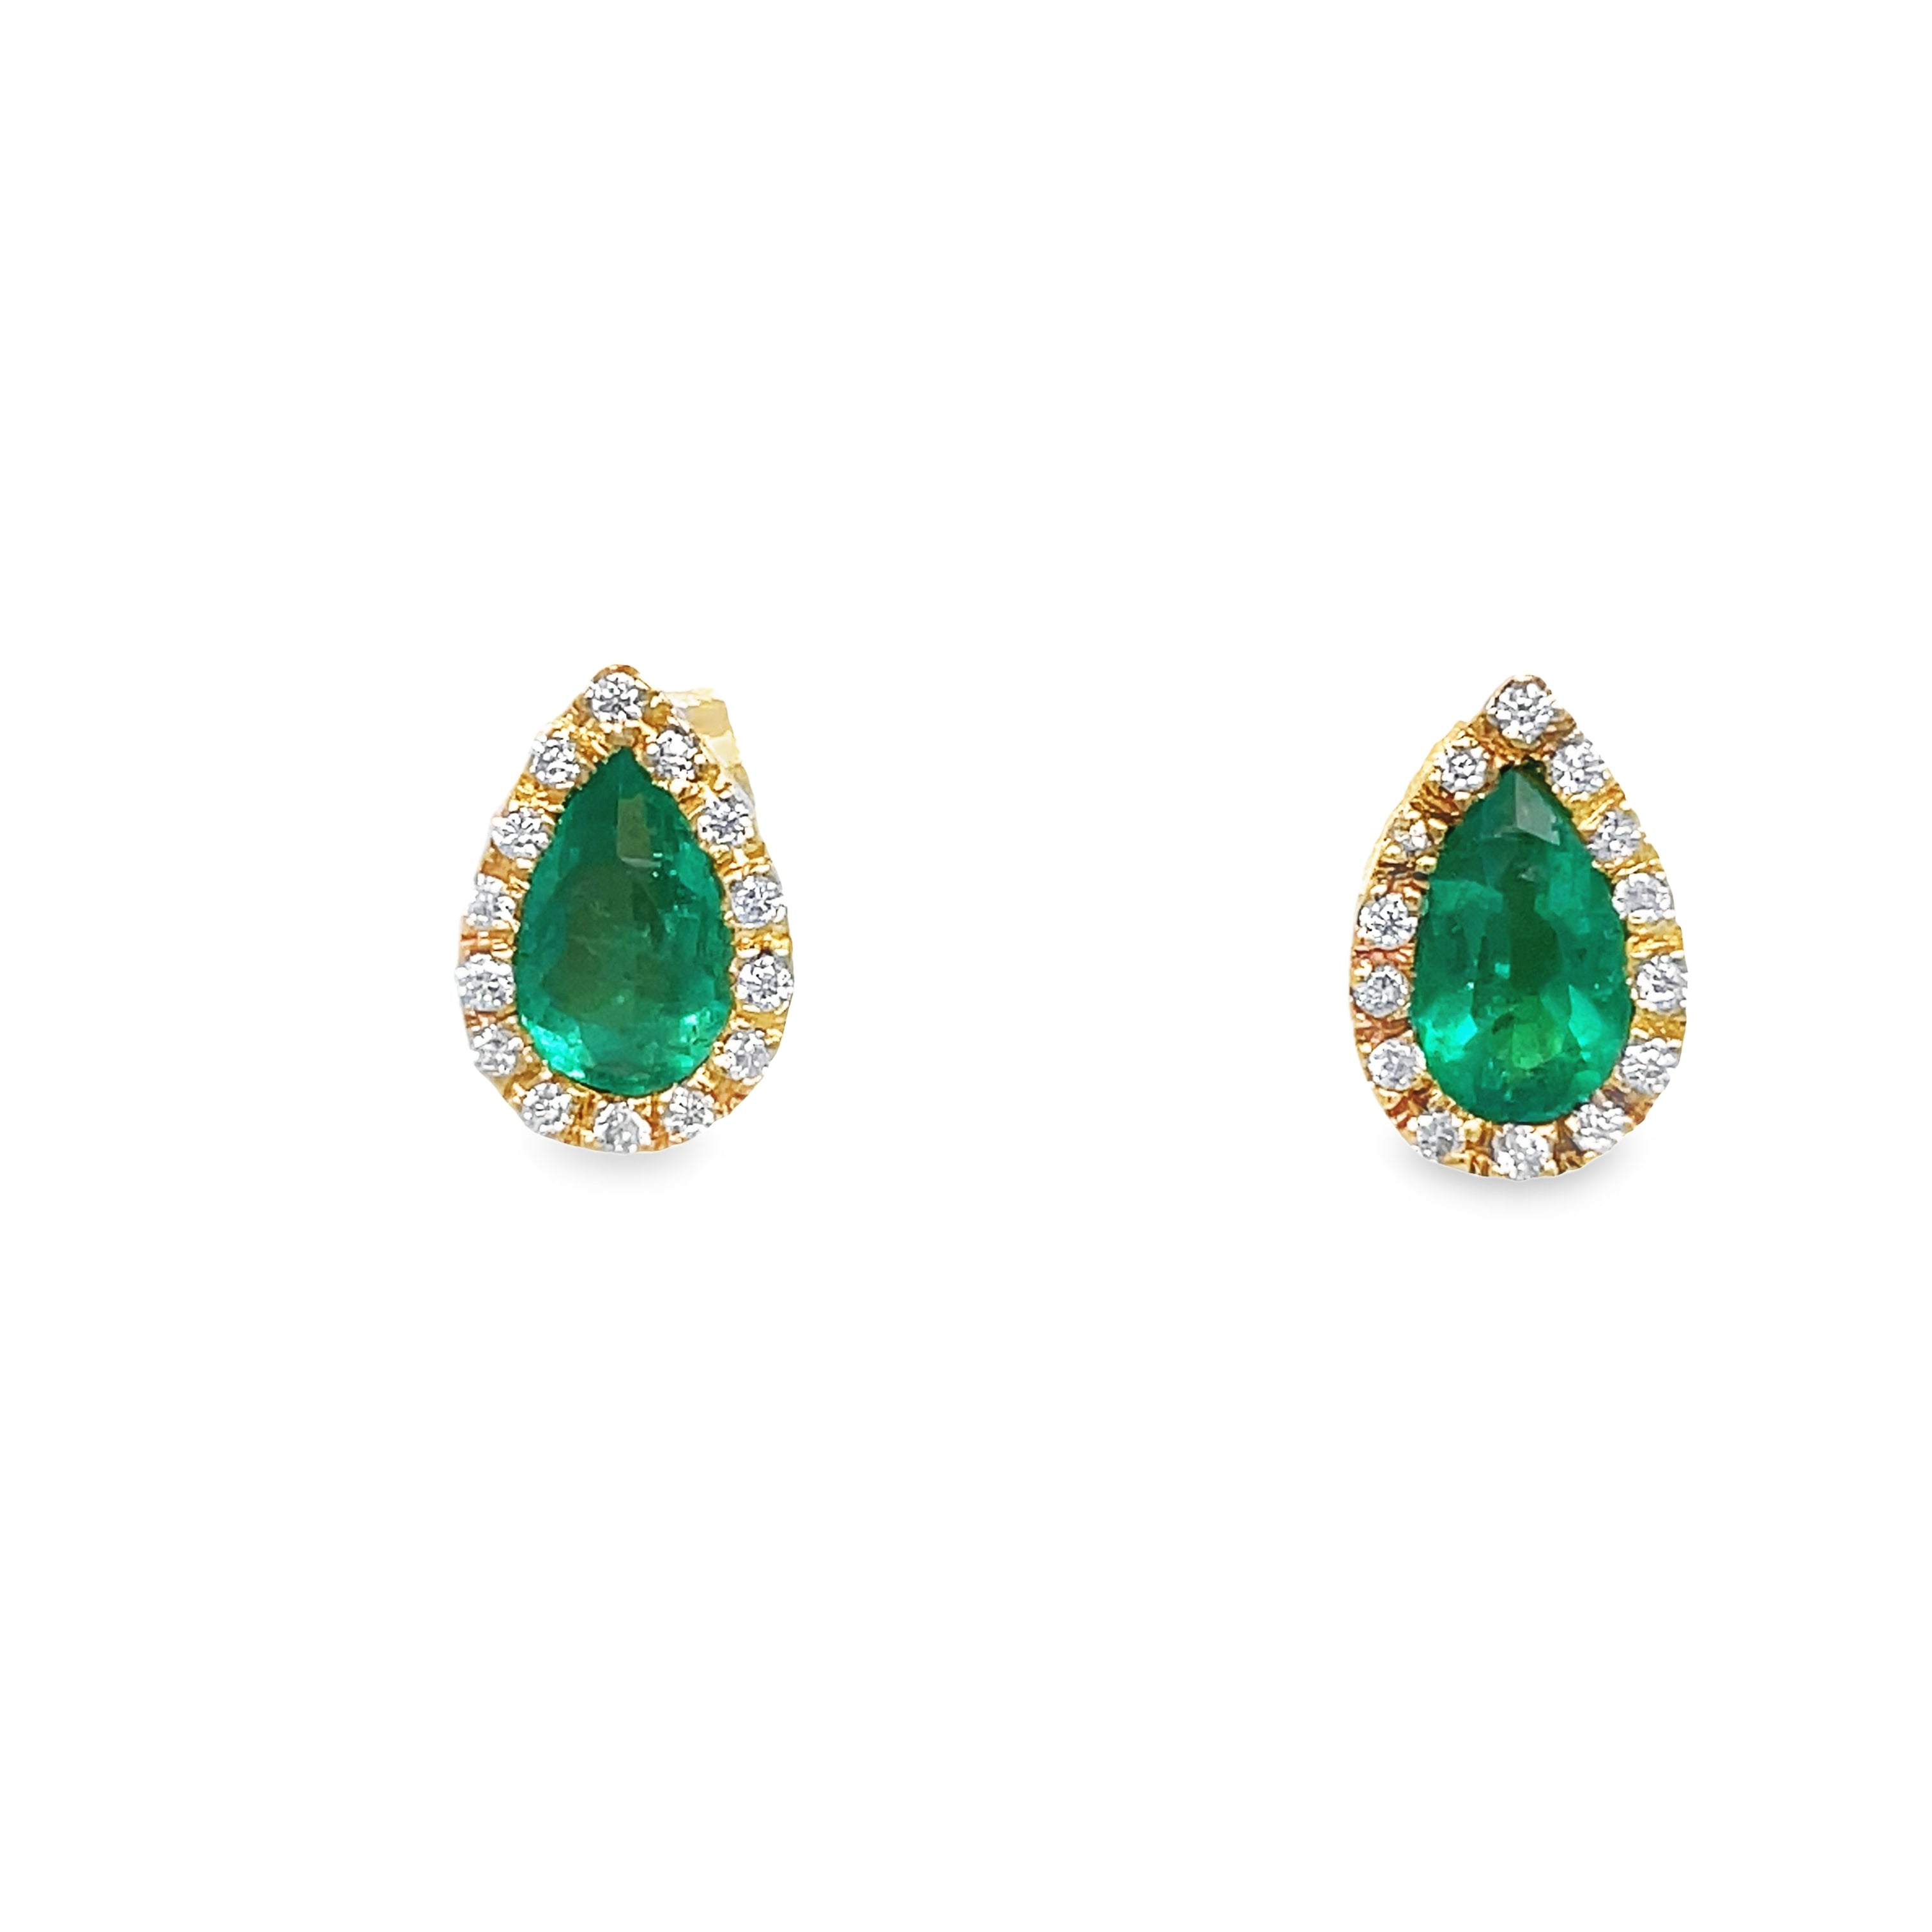 These Colombian Emerald and Diamond Stud Earrings feature a pear shape cut emerald in 18k yellow gold, complimented by round diamonds. This elegant earring set is perfect for those looking to add the perfect combination of sparkle and sophistication to their look. 9.50 x 6.50 mm size&nbsp;